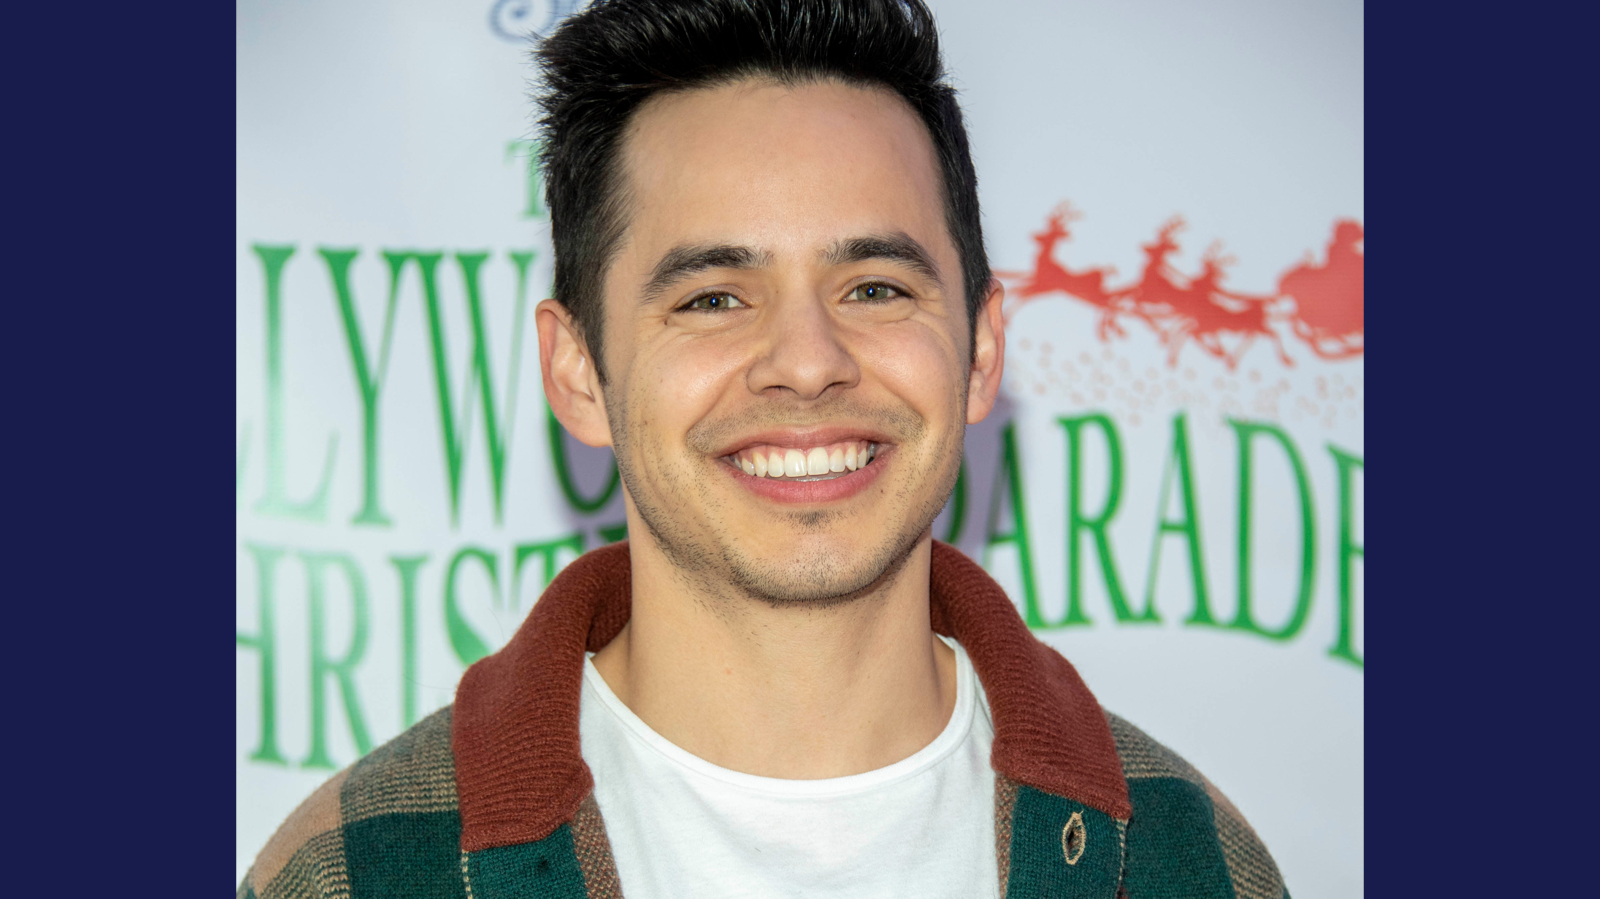 David Archuleta attends 88th Annual Hollywood Christmas Parade Featuring Marine Toys for Tots on Hollywood Boulevard, Hollywood, CA on December 1, 2019